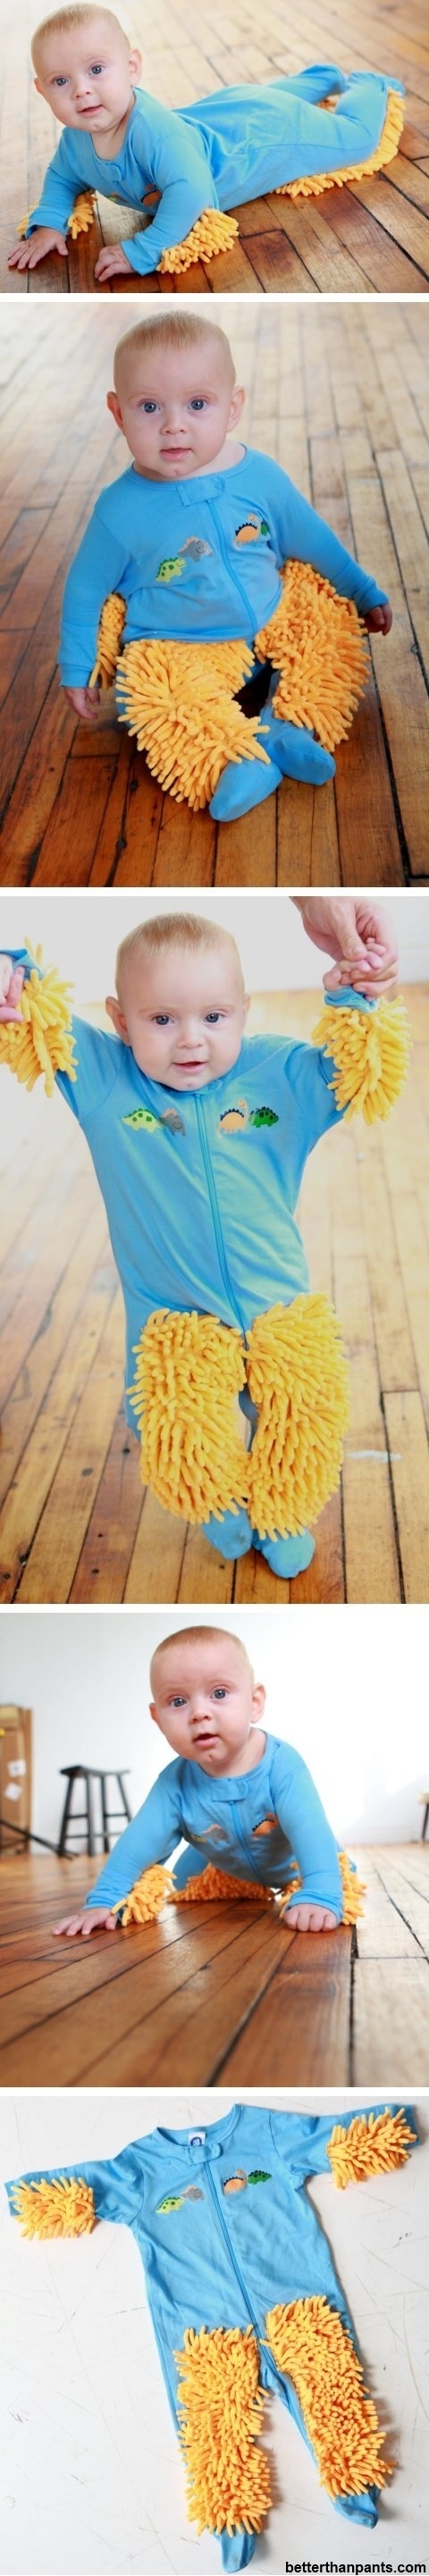 A baby mop outfit: